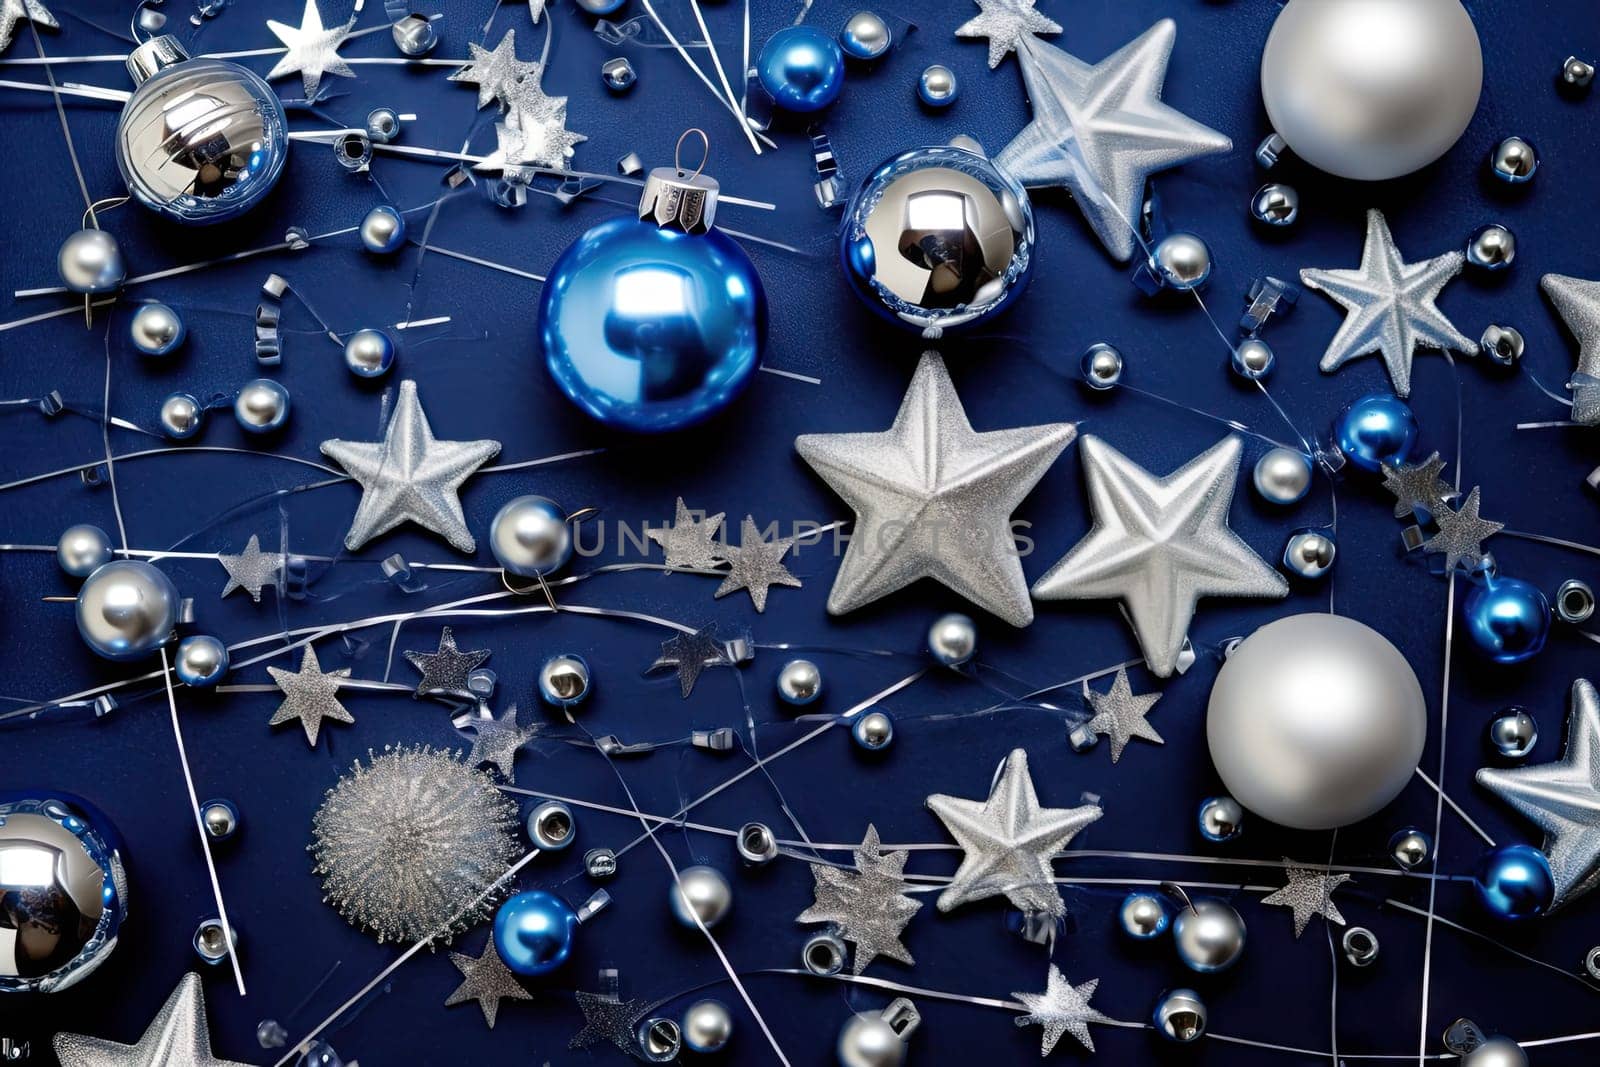 A Sparkling Collection of Colorful Christmas Ornaments on a Festive Blue Background